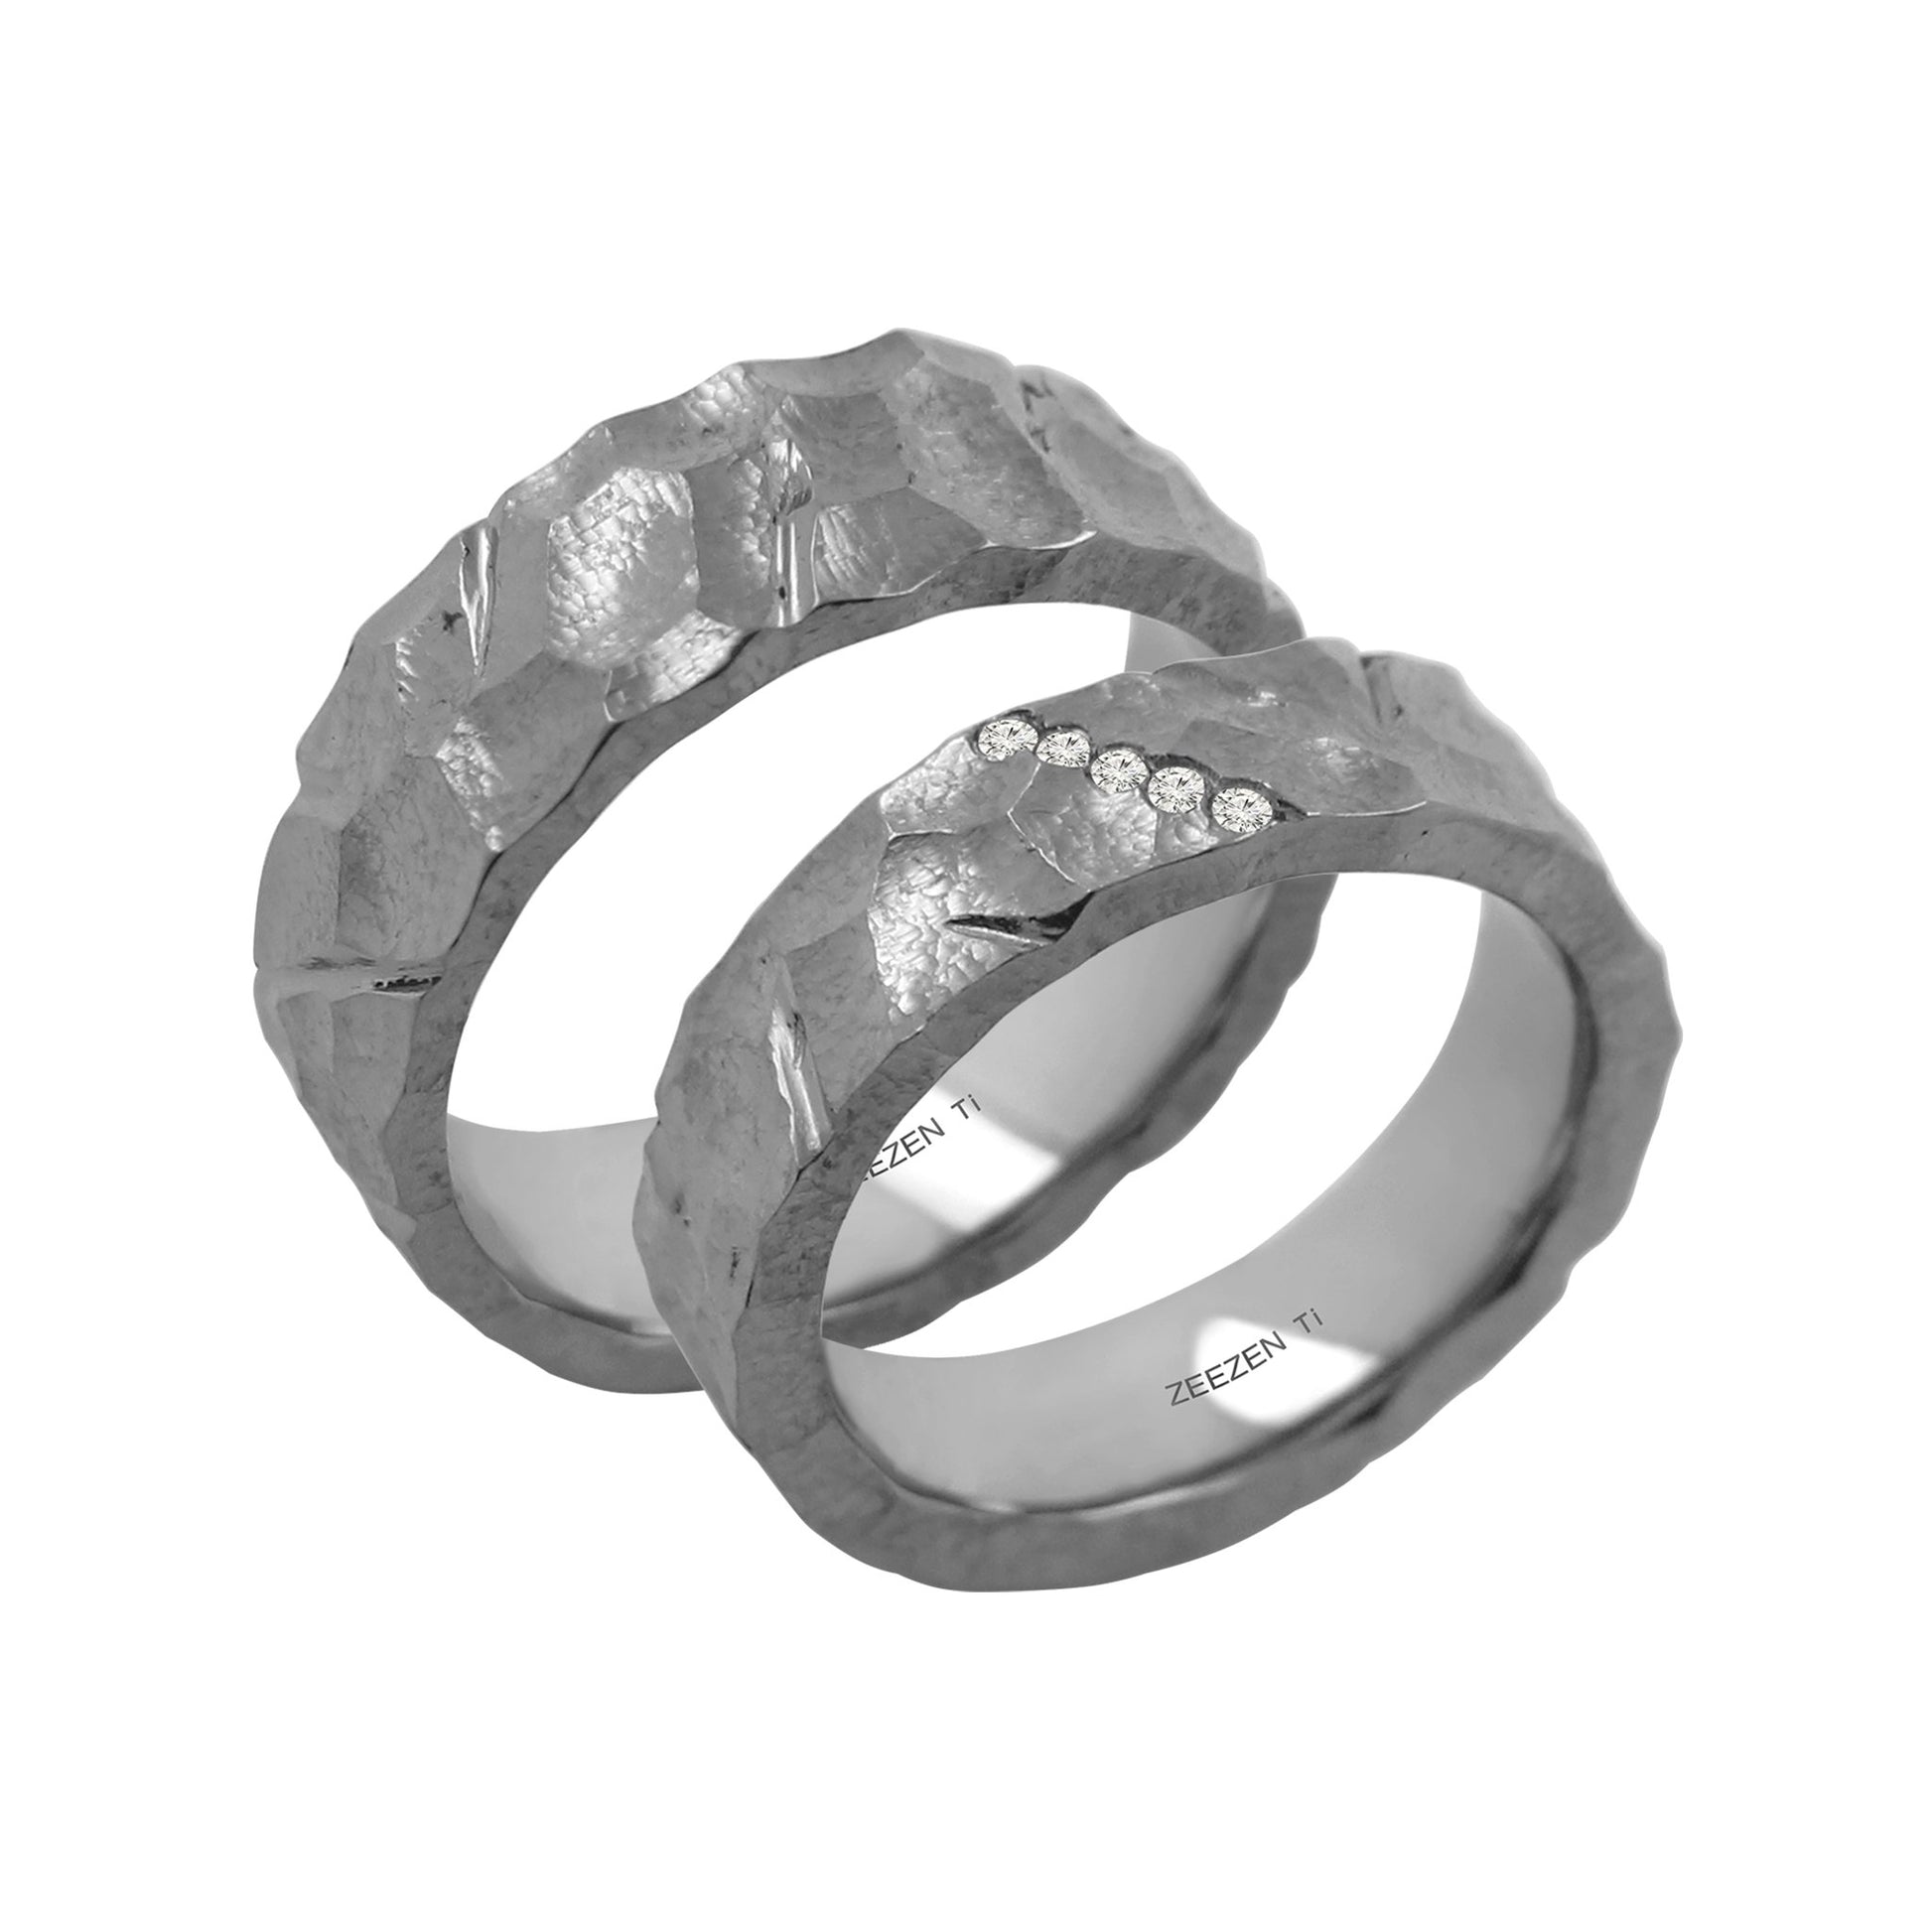 Tantalum Ring w/o min. Boundary/Polished(Cut). Tantalum ring with rock-like texture. Ring profile: width: 8.0 mm || height: 2.5 mm. Next to a matching couple ring w/ five lab grown diamonds going down diagonally from left to right in the center of the ring.